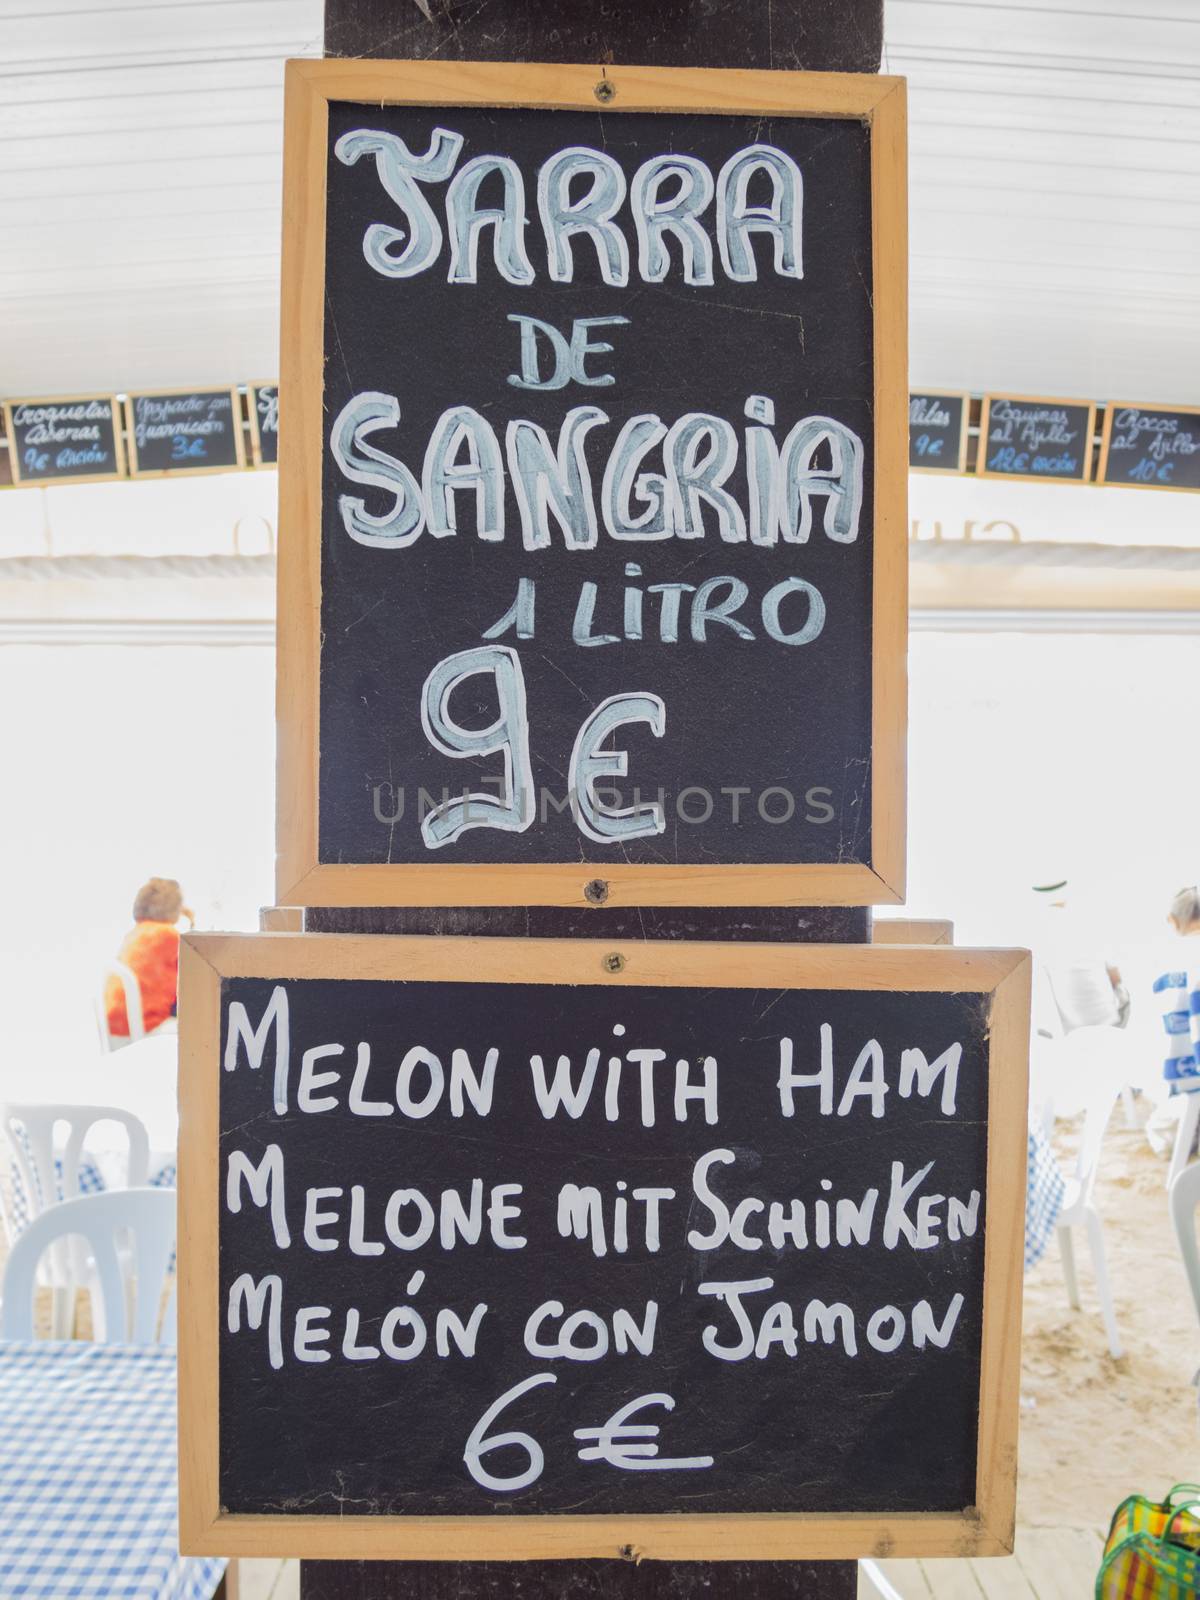 black placard spanish white handwritten in wall with typical menu food dishes in Spain restaurant like sangria and melon ham